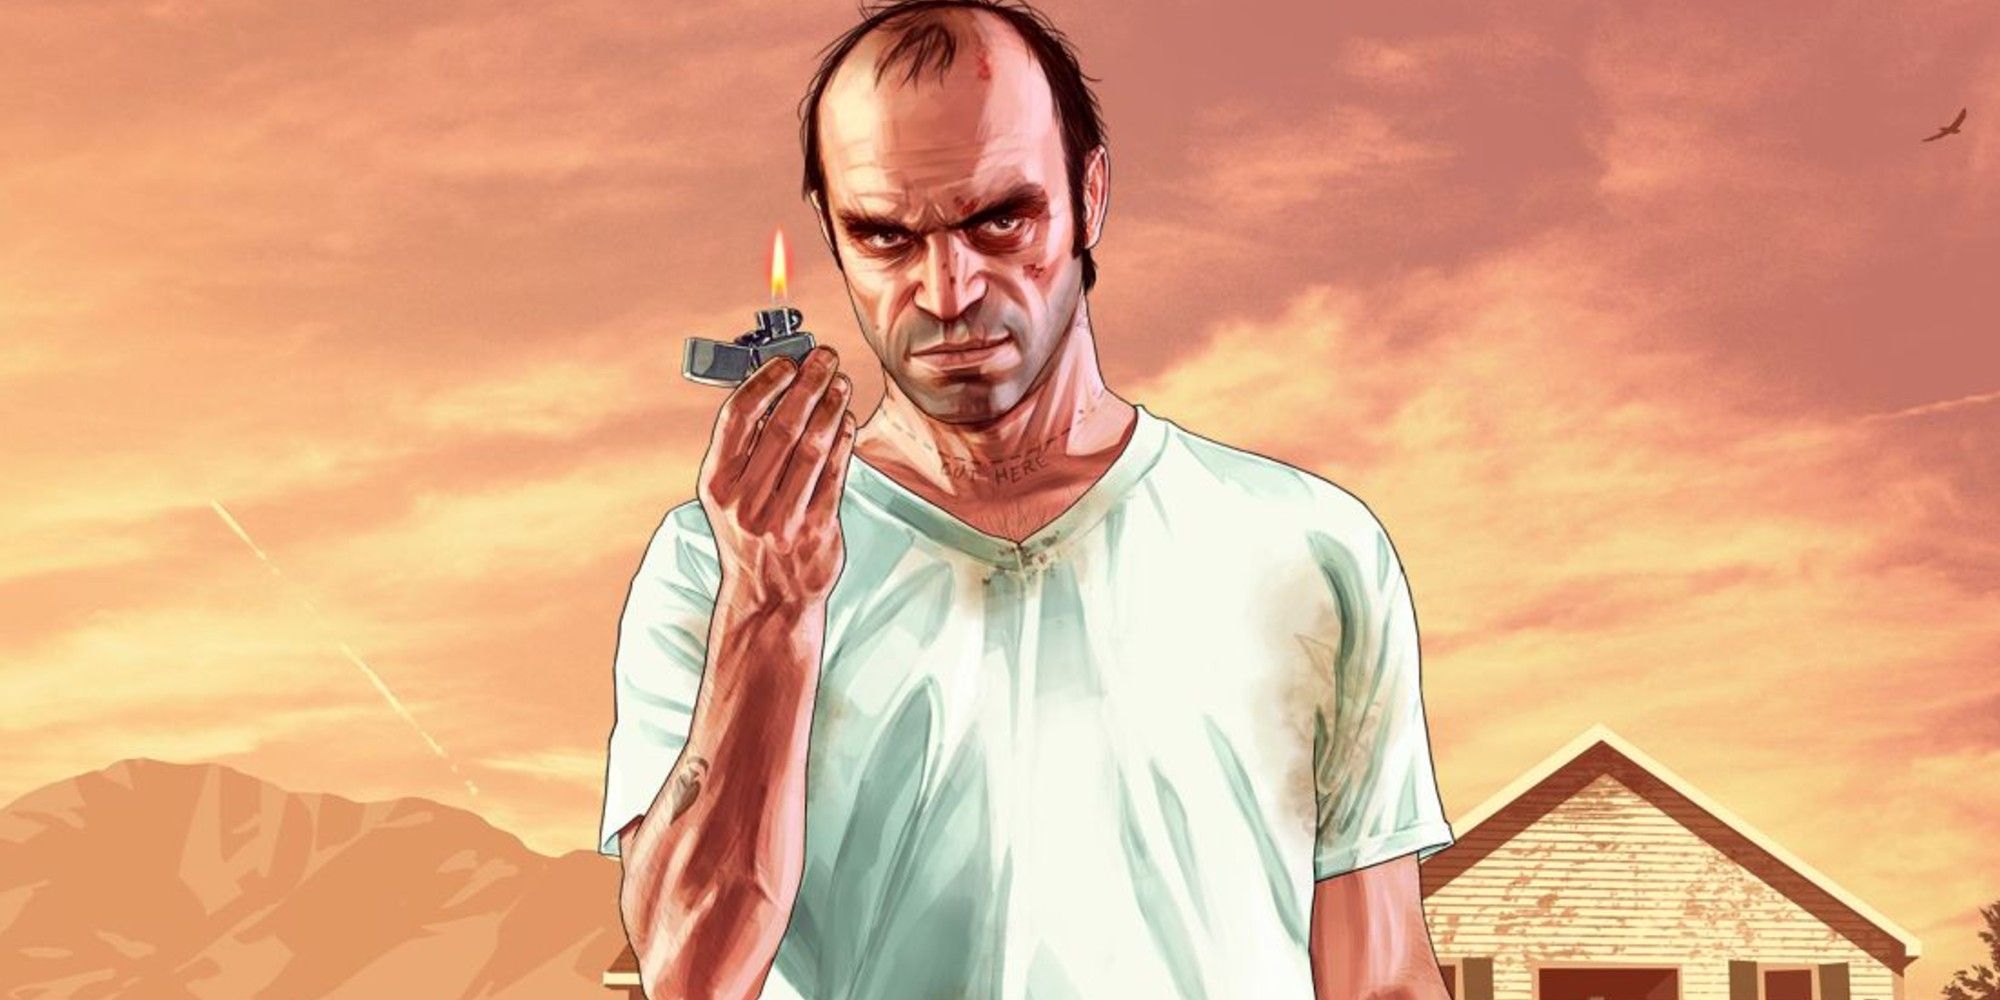 Grand Theft Auto Characters That Should Return For GTA 6